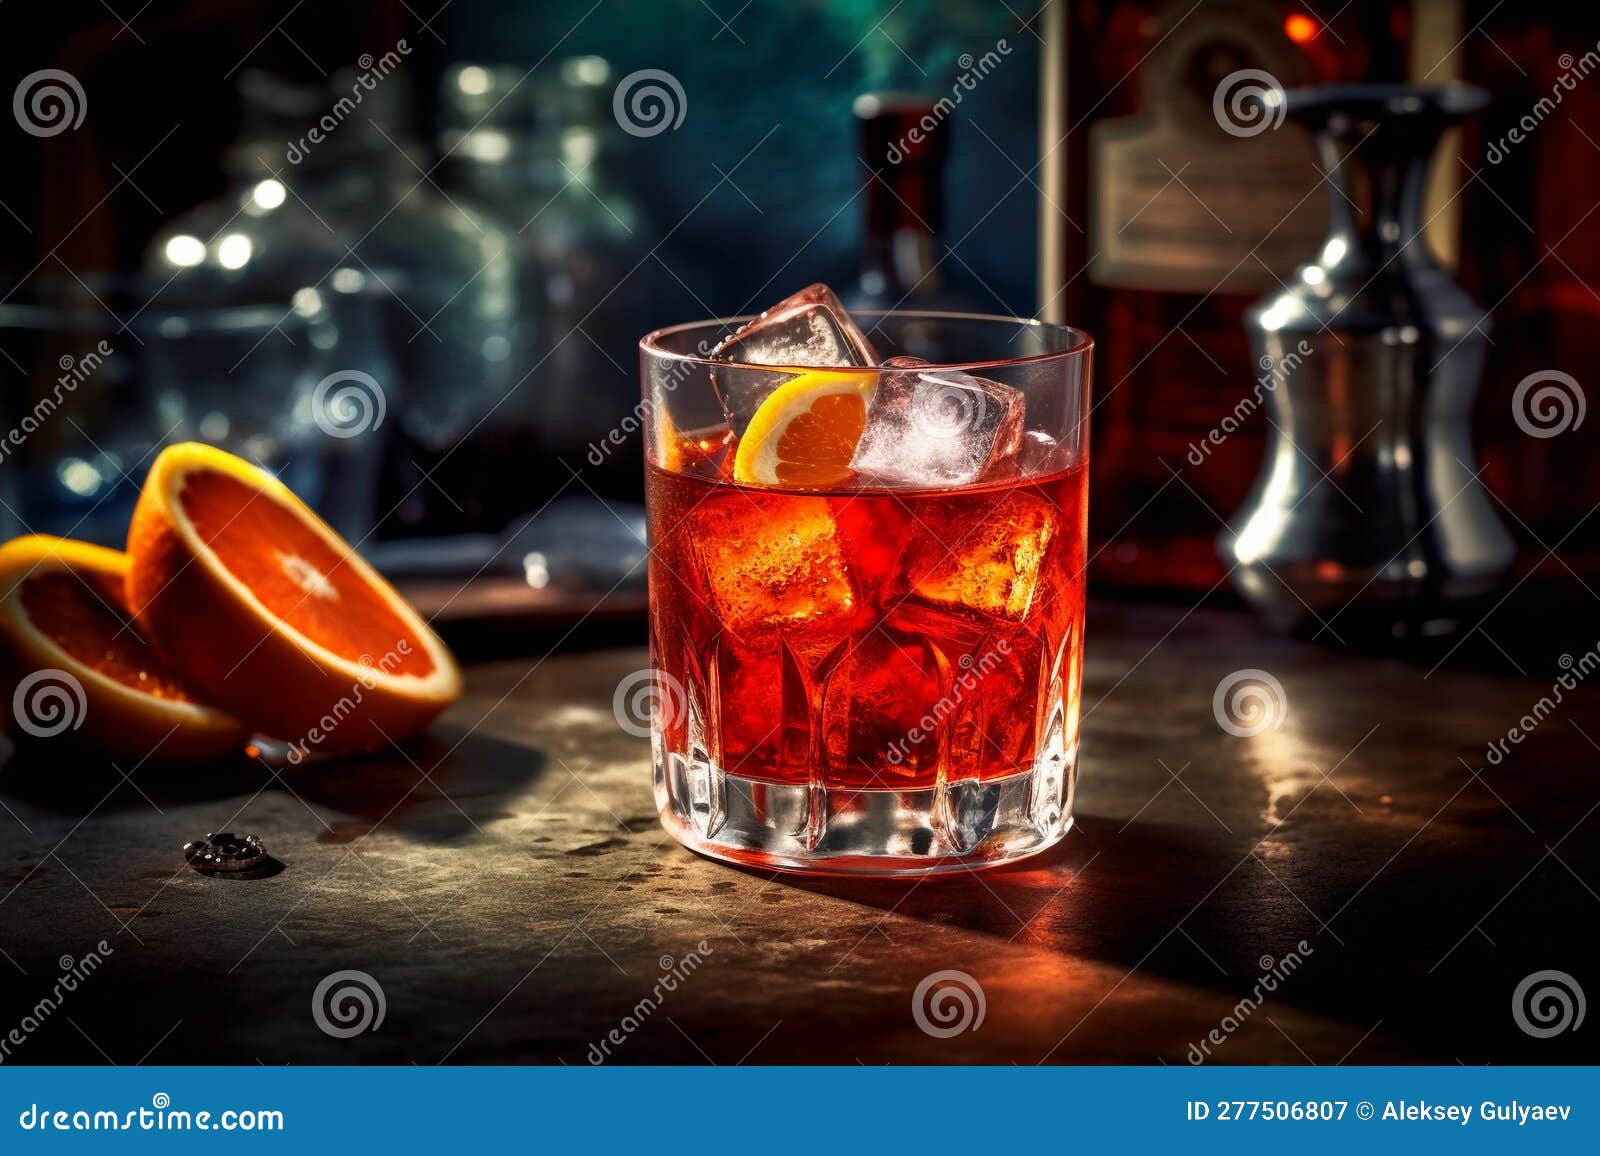 a negroni sbagliato cocktail with ice cubes on a bar counter